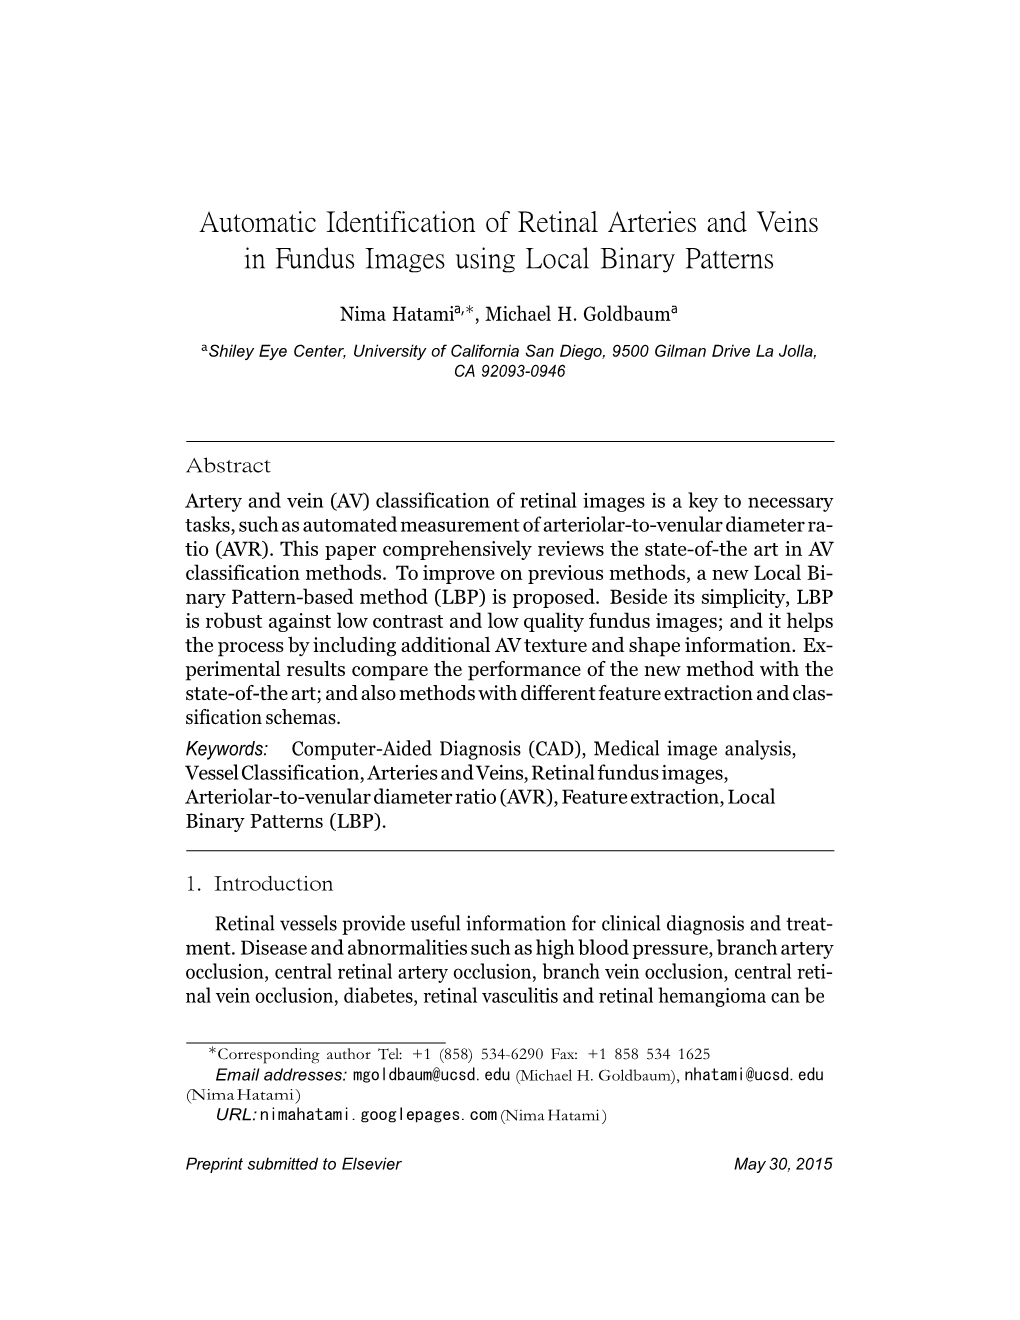 Automatic Identification of Retinal Arteries and Veins in Fundus Images Using Local Binary Patterns